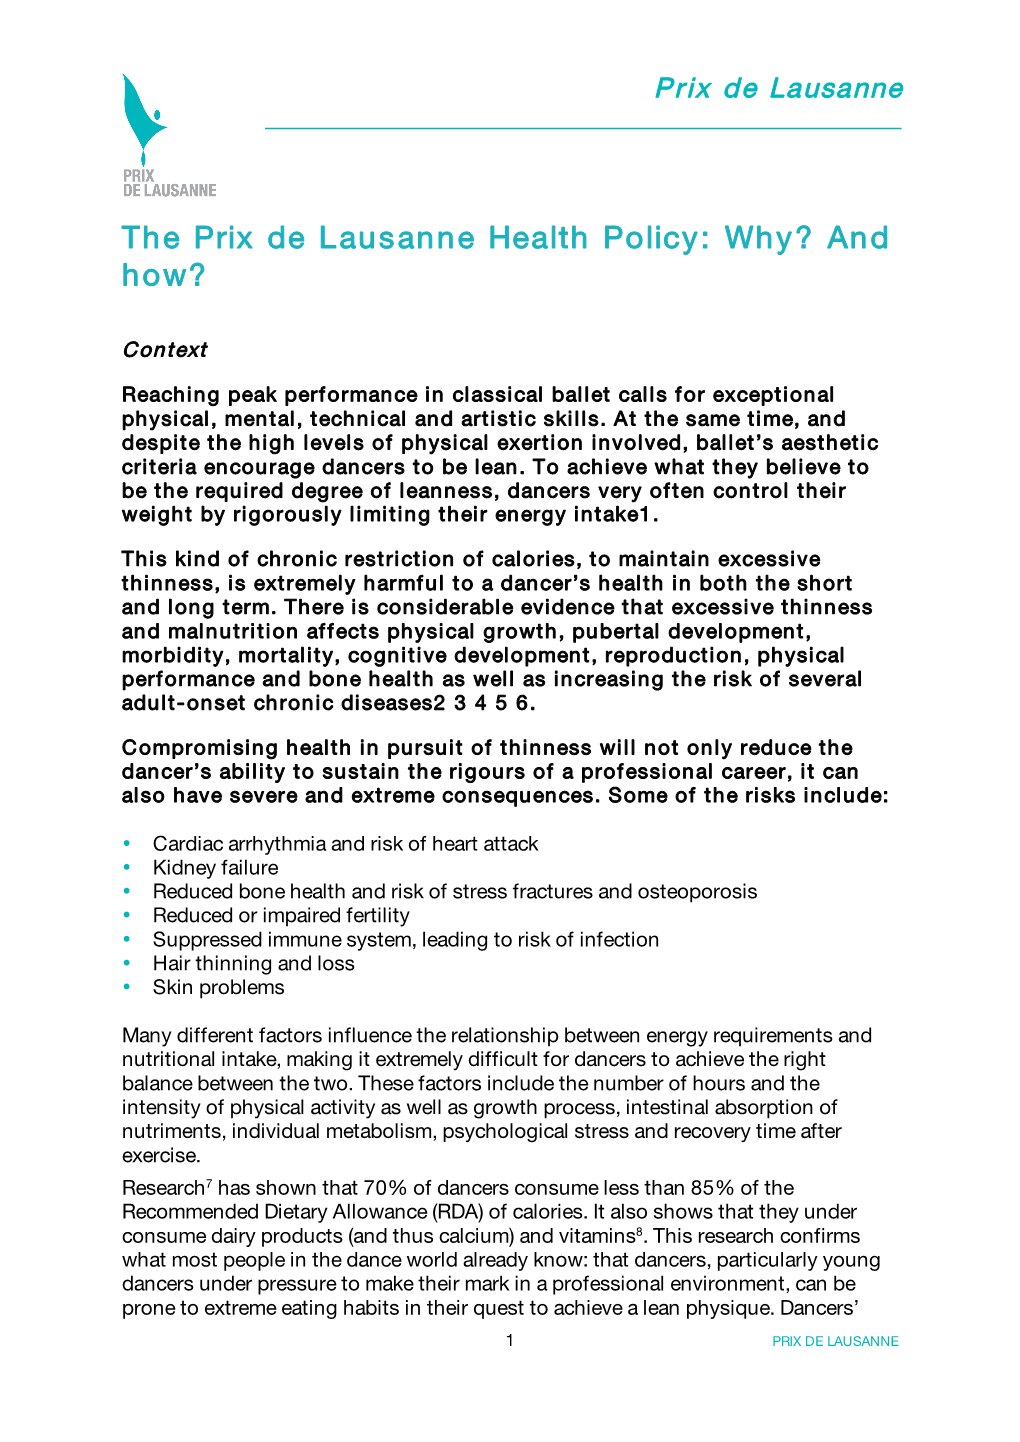 The Prix De Lausanne Health Policy: Why? and How?